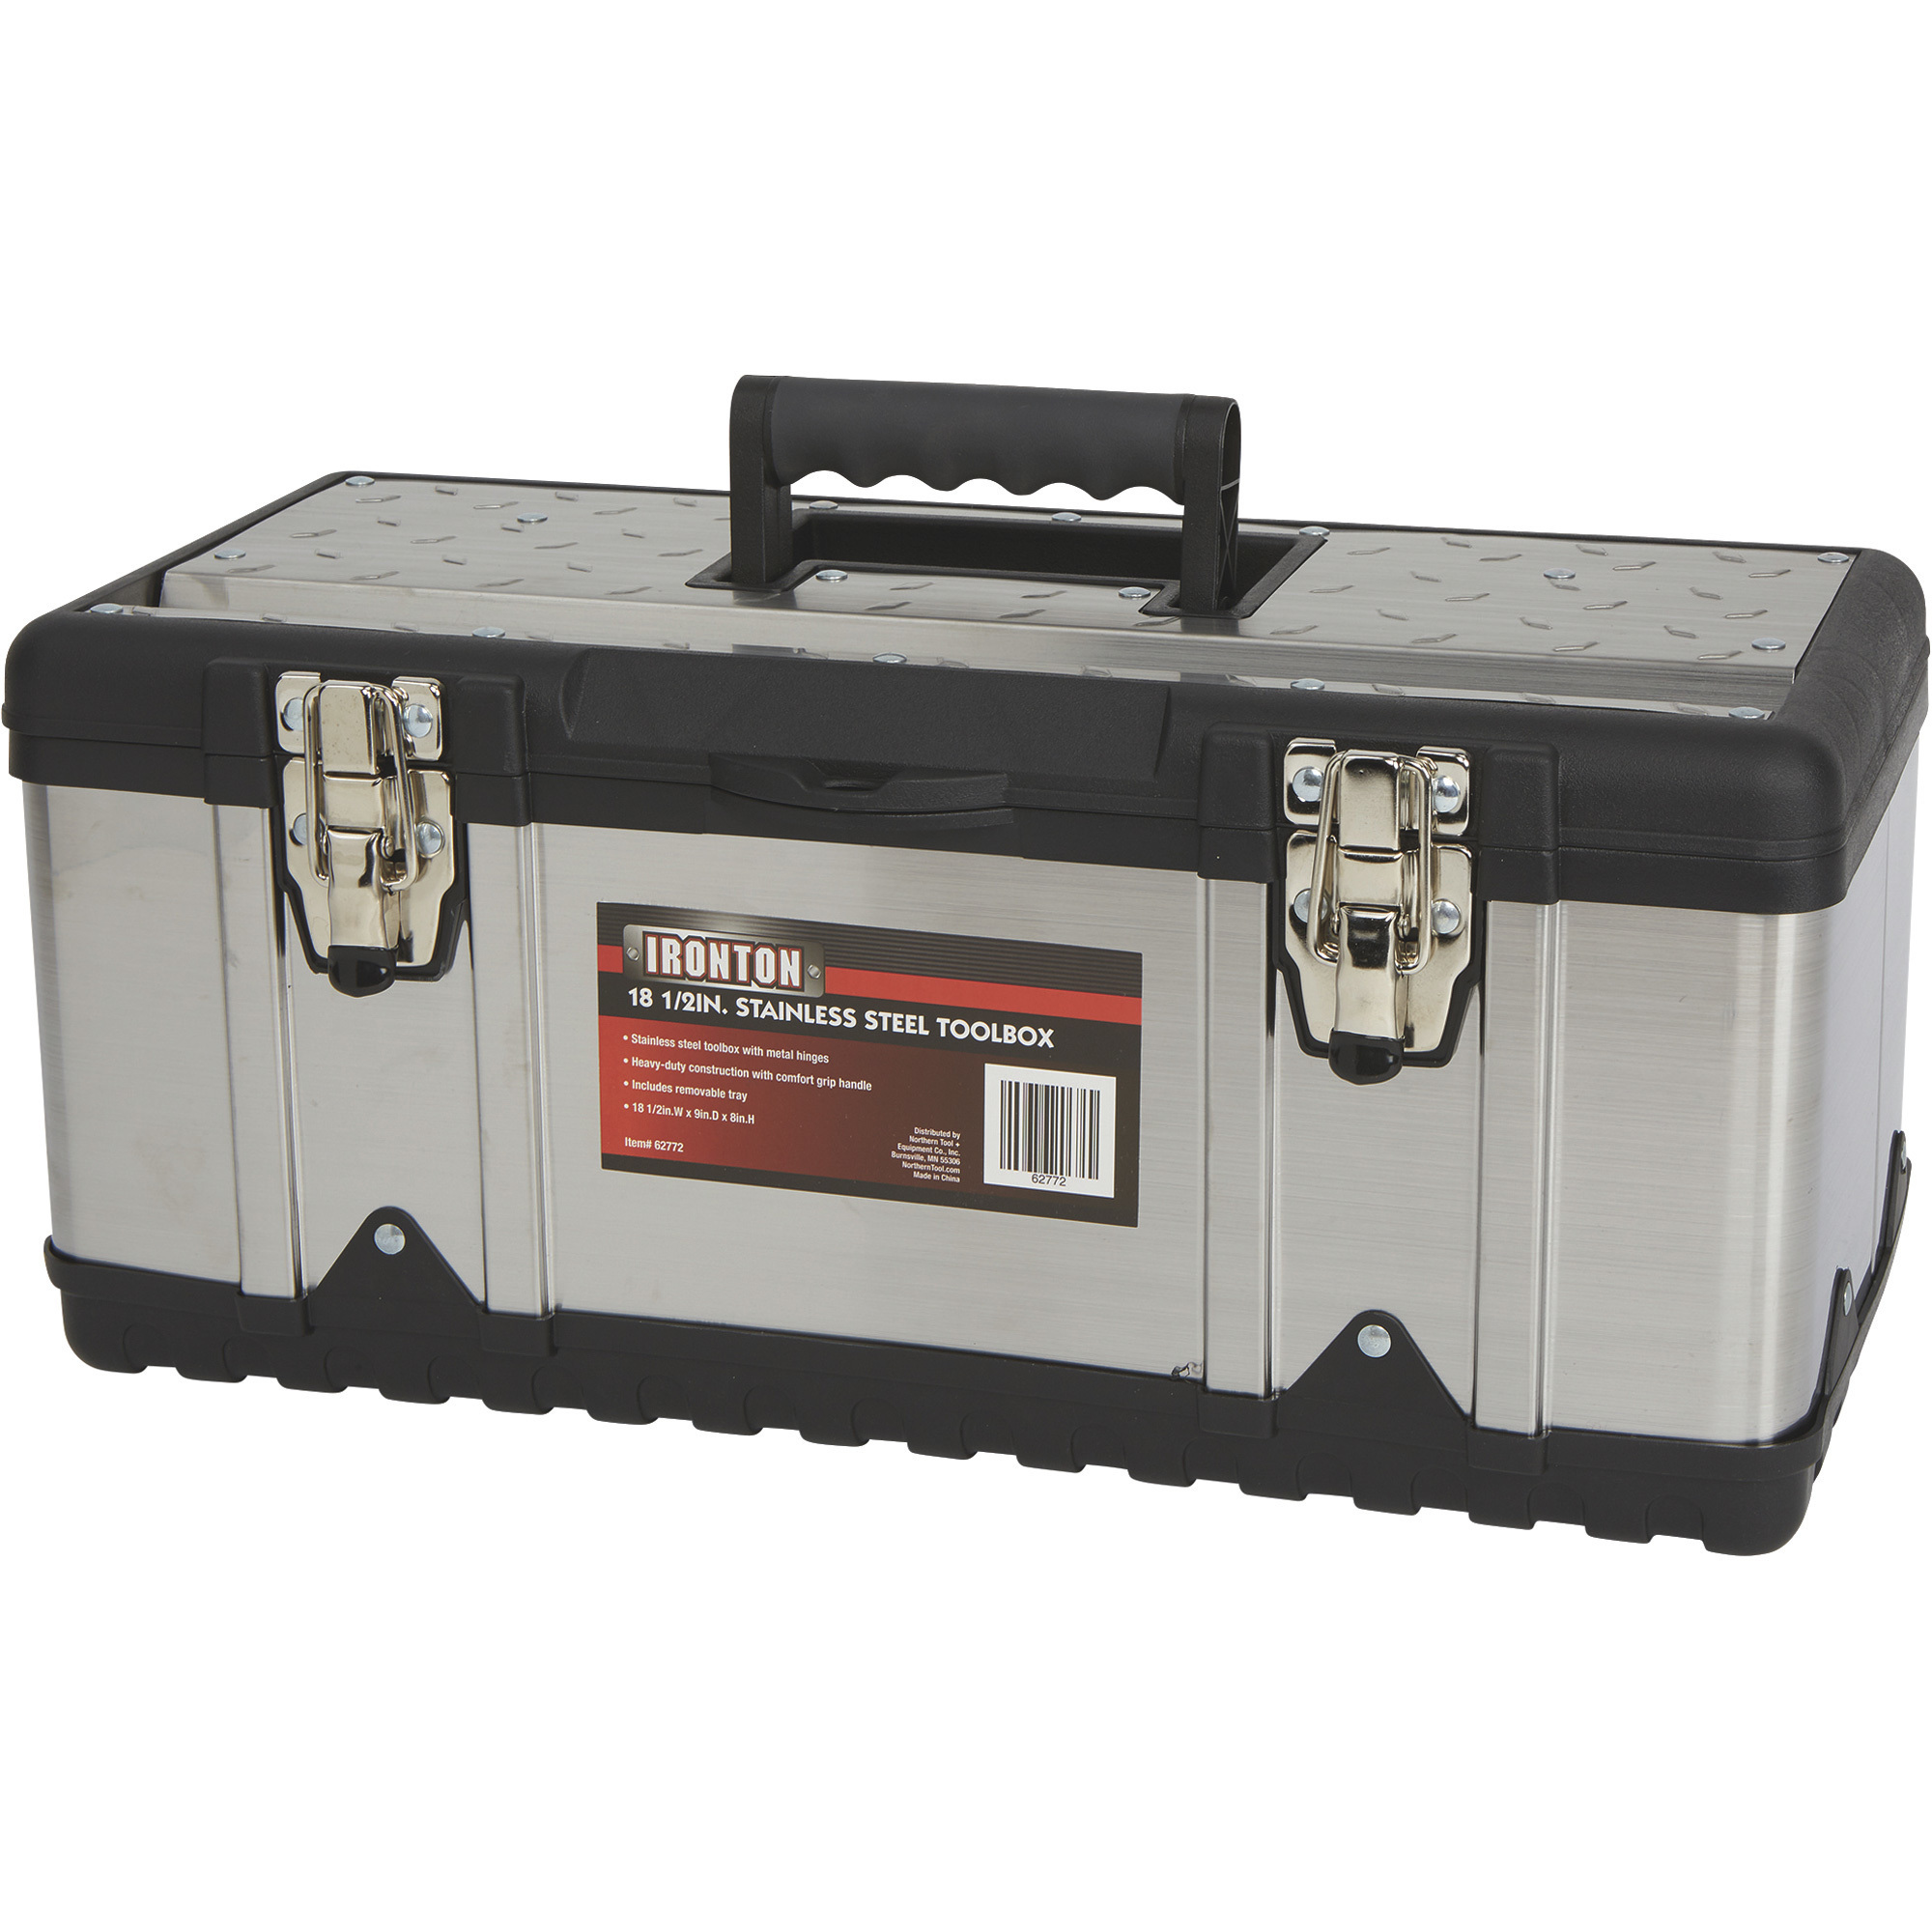 Ironton 18.5Inch Stainless Steel Toolbox, 18 1/2Inch W x 9Inch D x 8Inch H